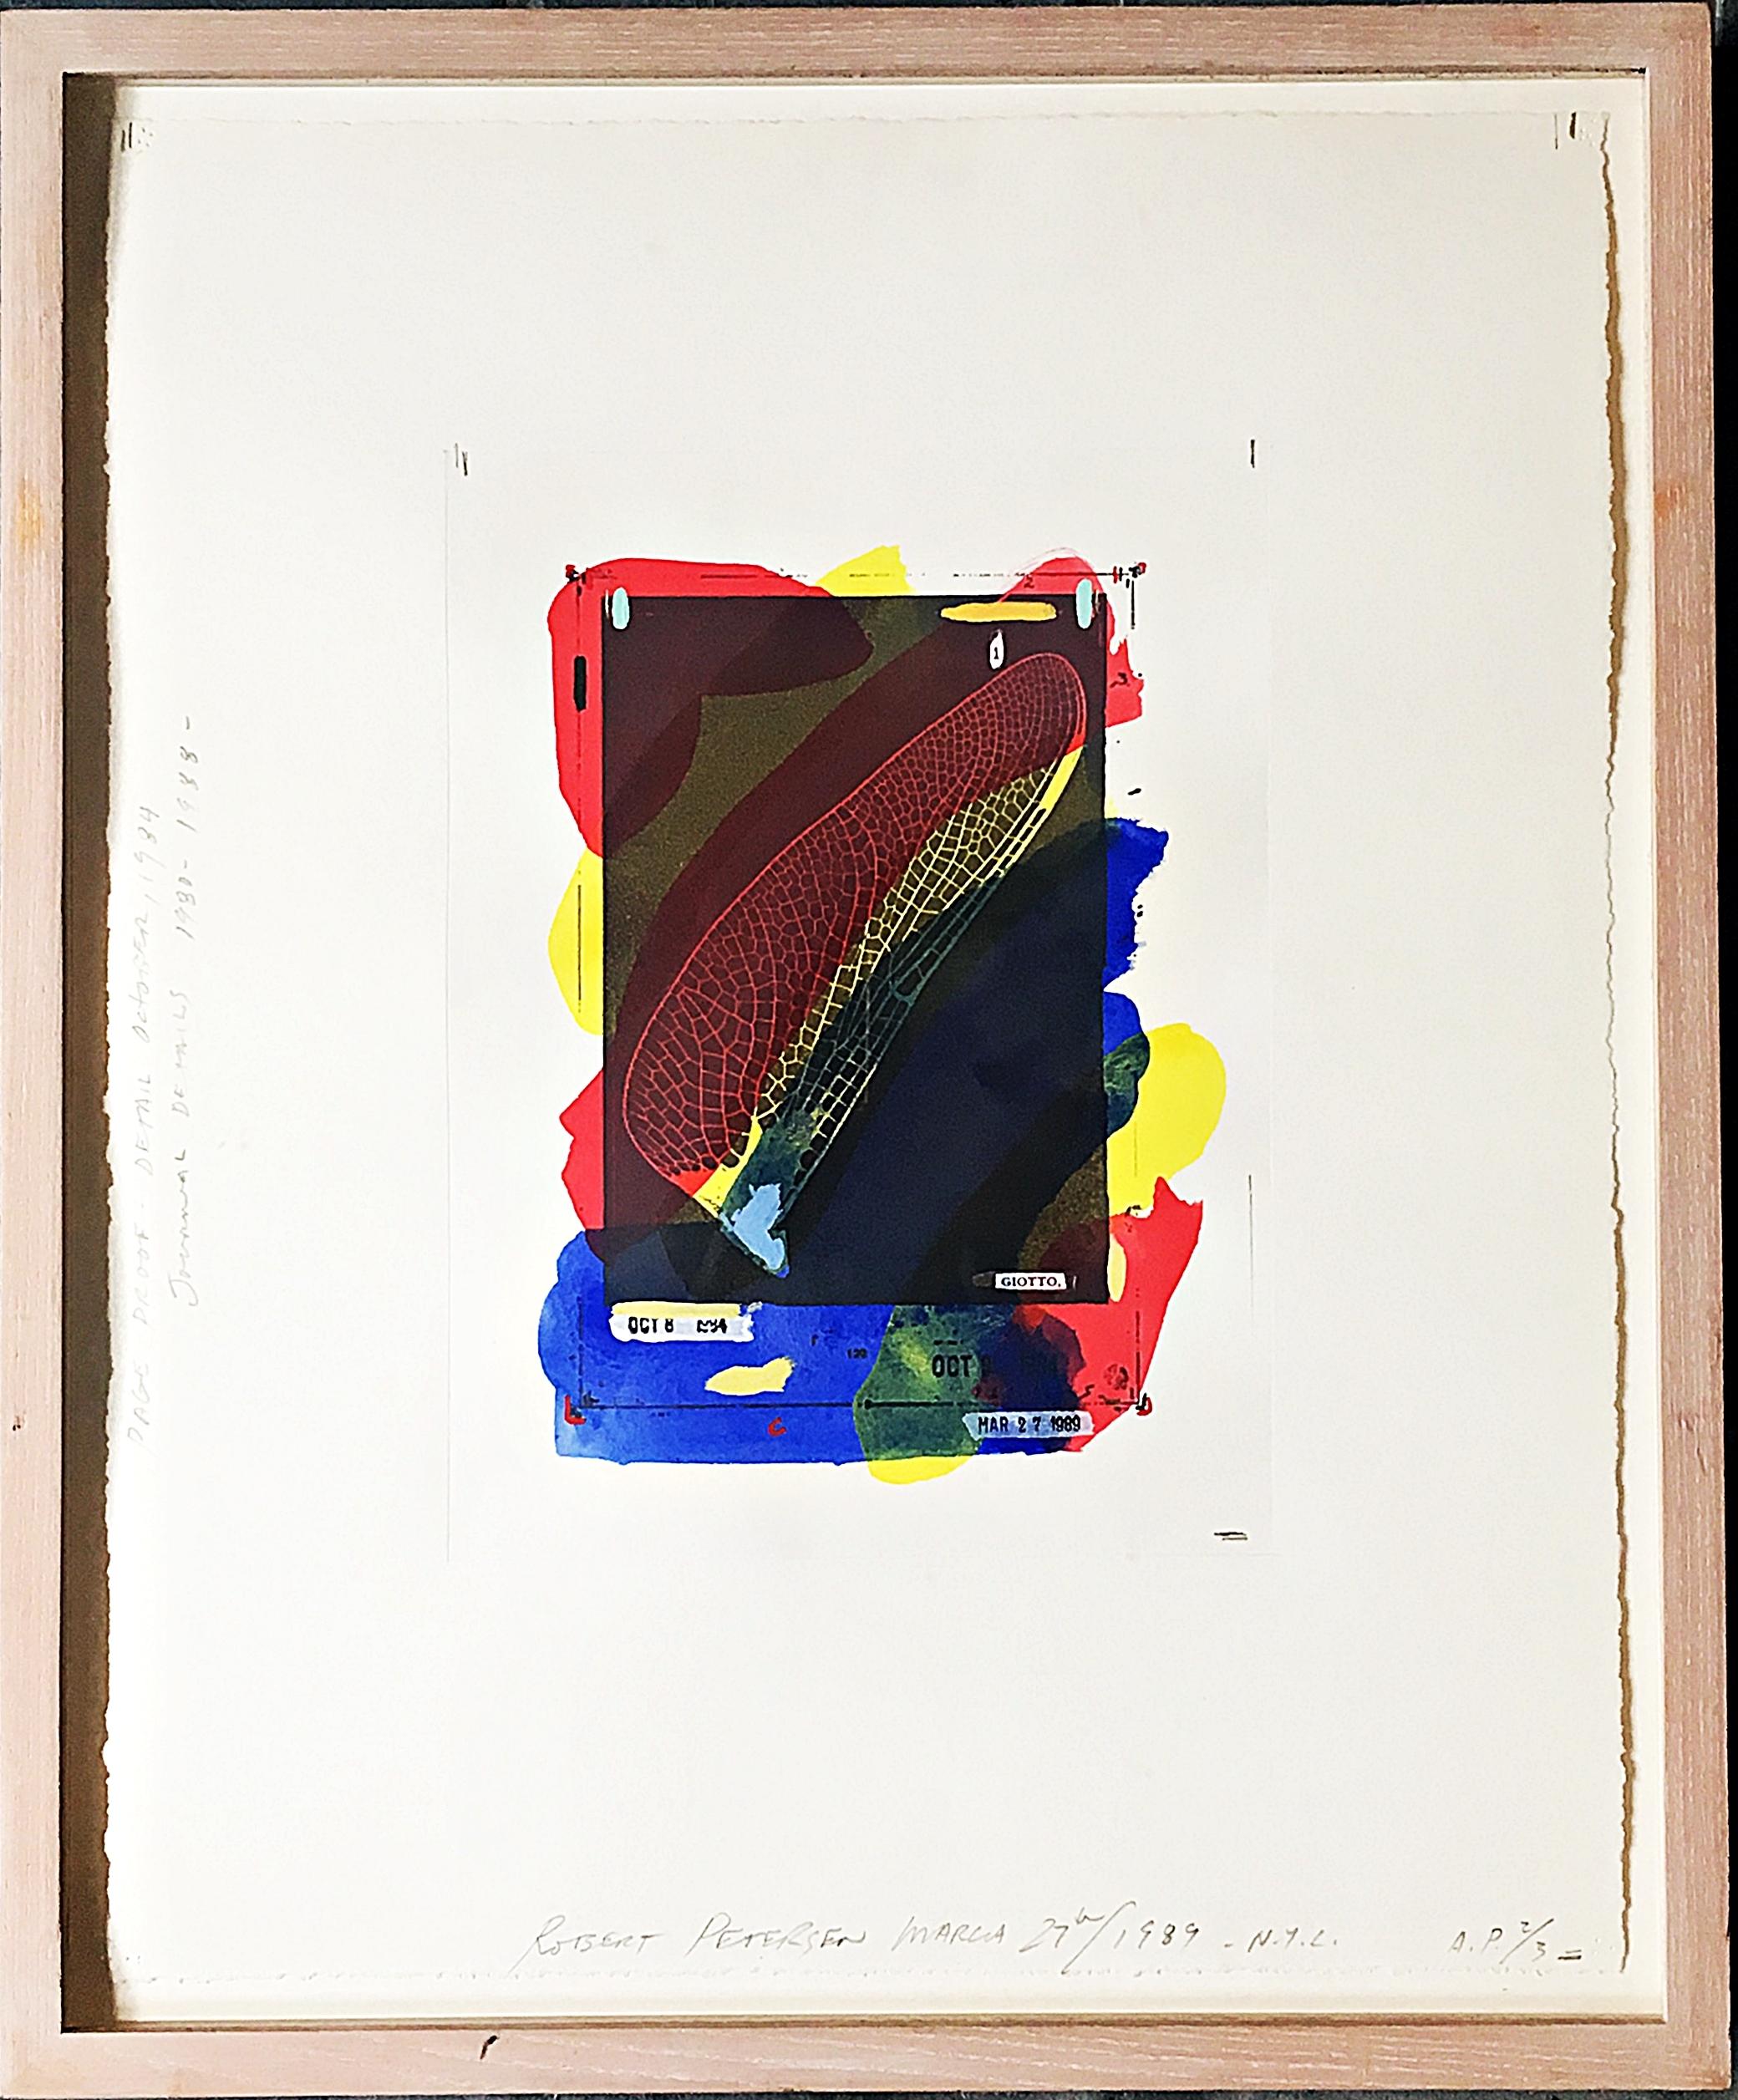 Robert Petersen
Giotto, 1989
Mixed Media: Silkscreen with Watercolor and Acrylic on paper
Hand signed, numbered and dated on front A.P 2/3
Frame Included
This vivid hand signed mixed media (silkscreen, acrylic and watercolor with graphite